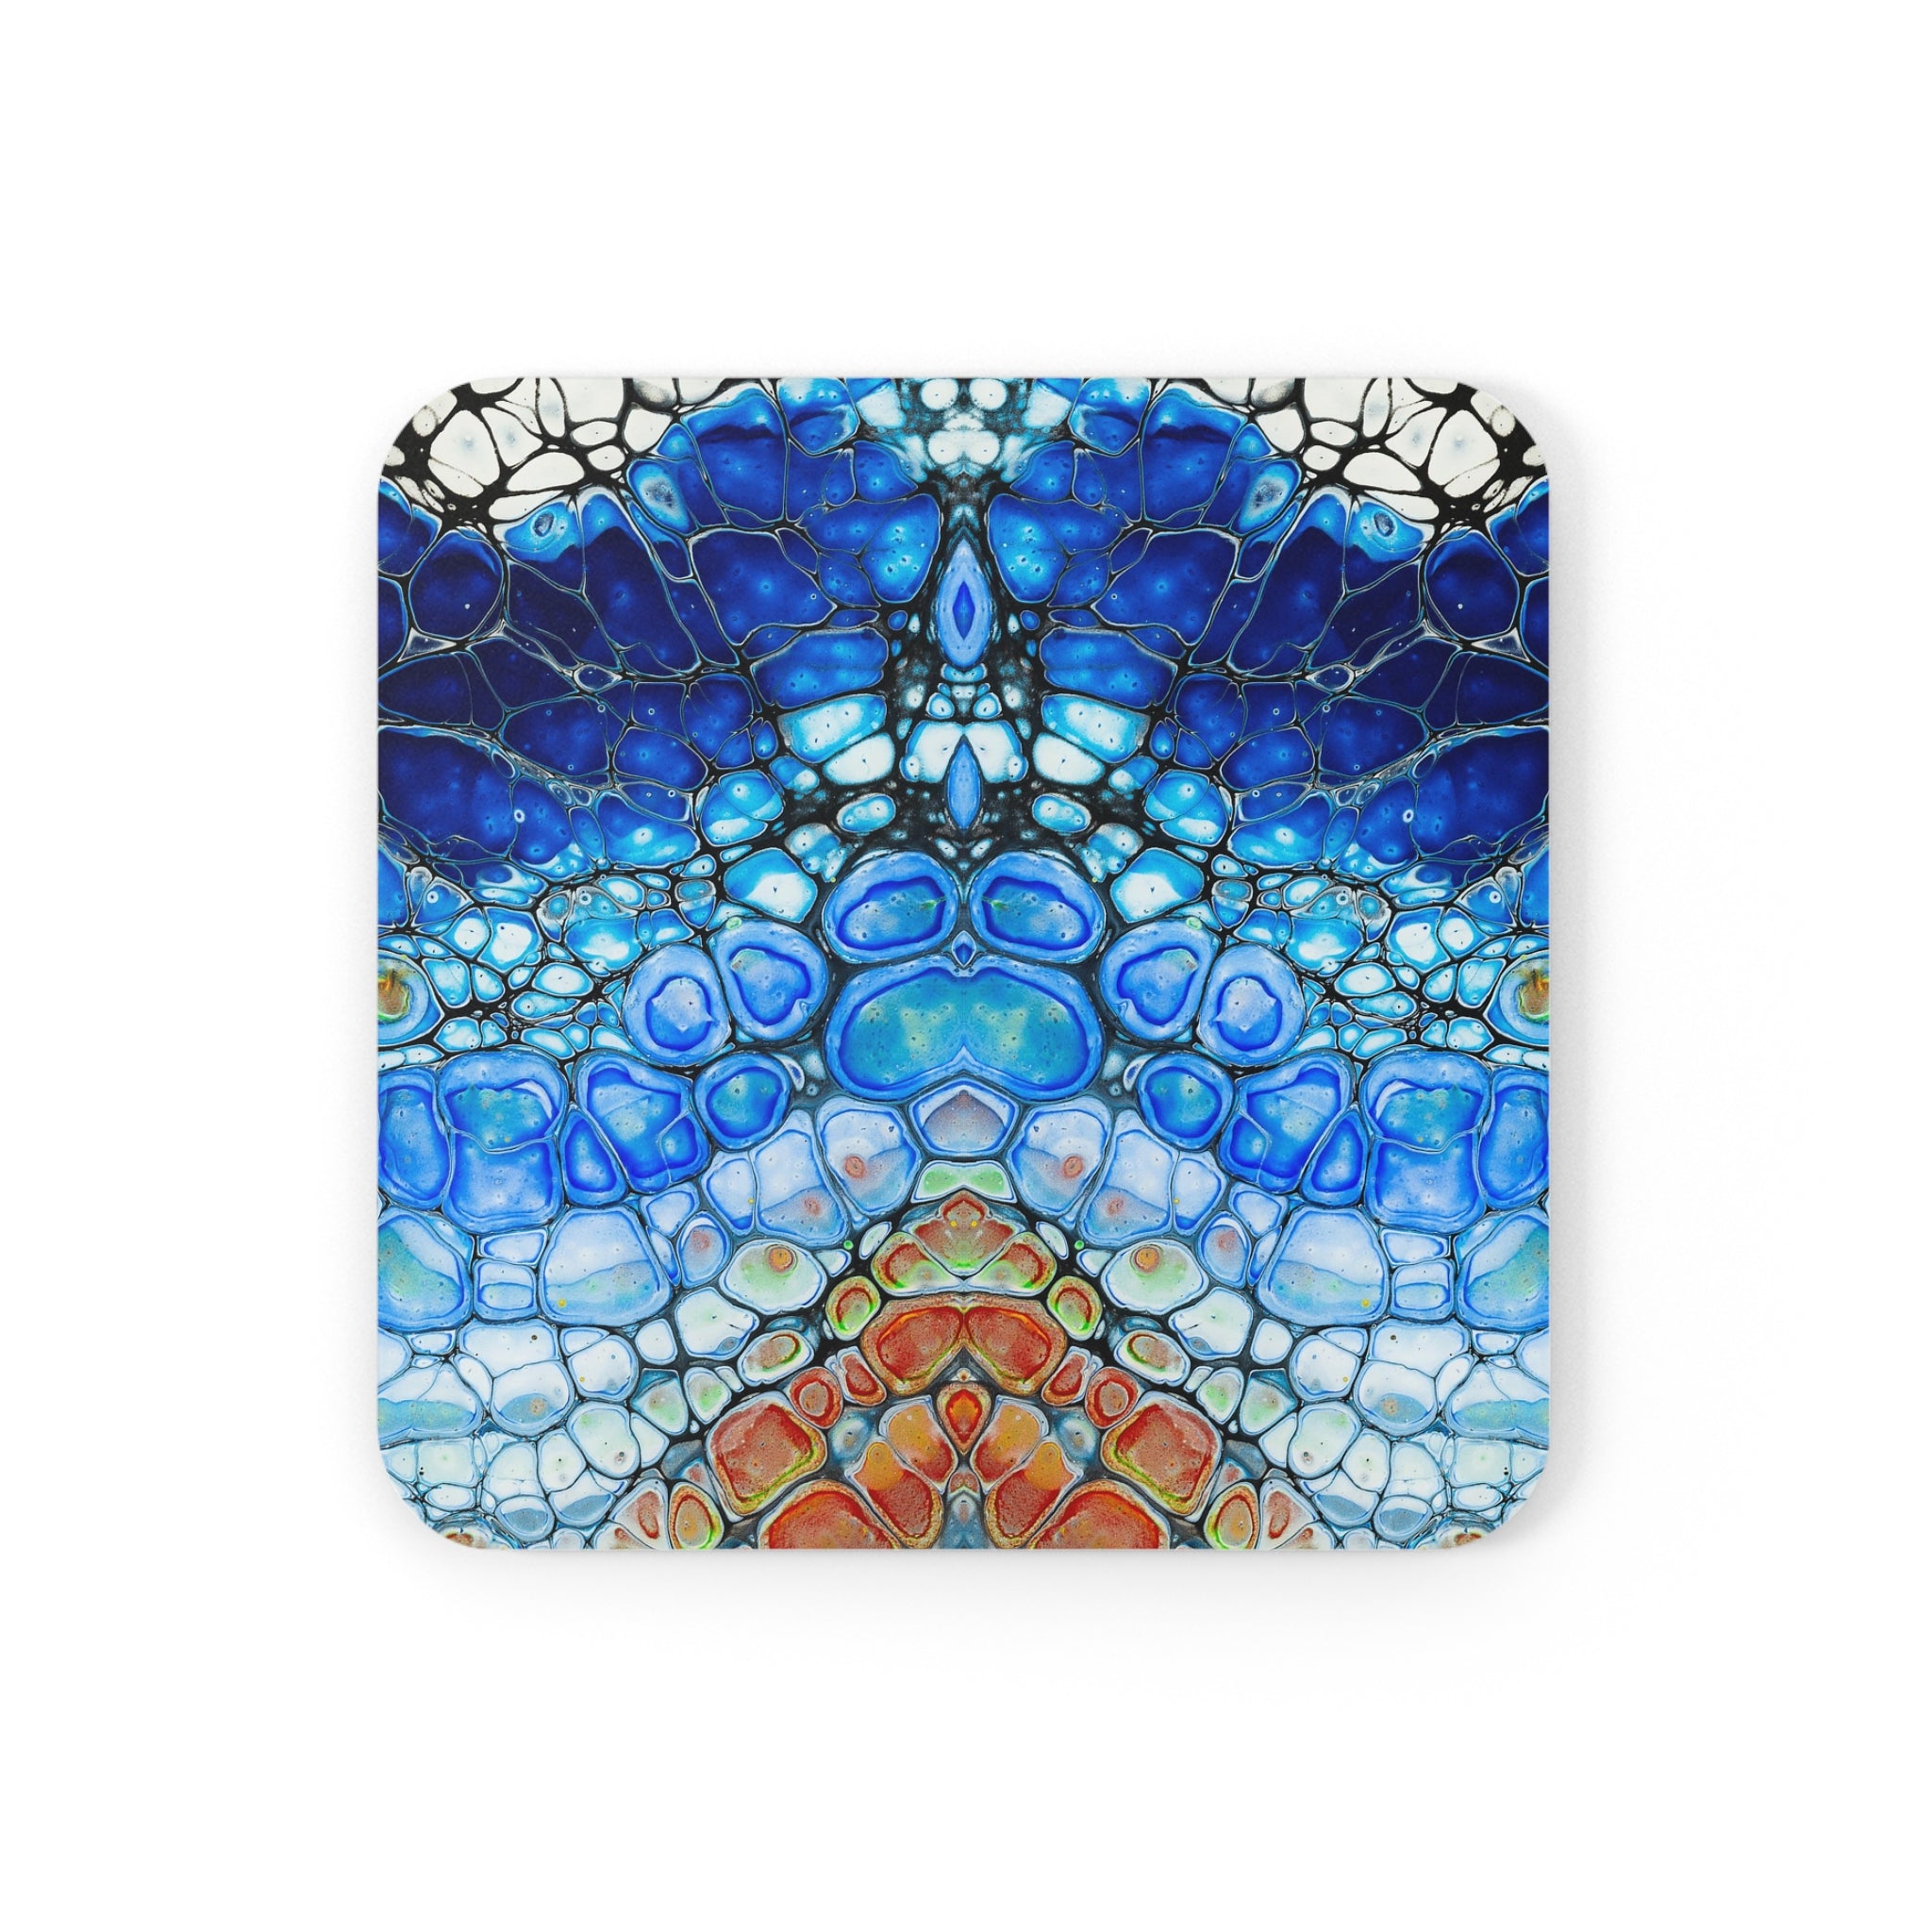 Cameron Creations - Cellonious B - Stylish Coffee Coaster - Square Front